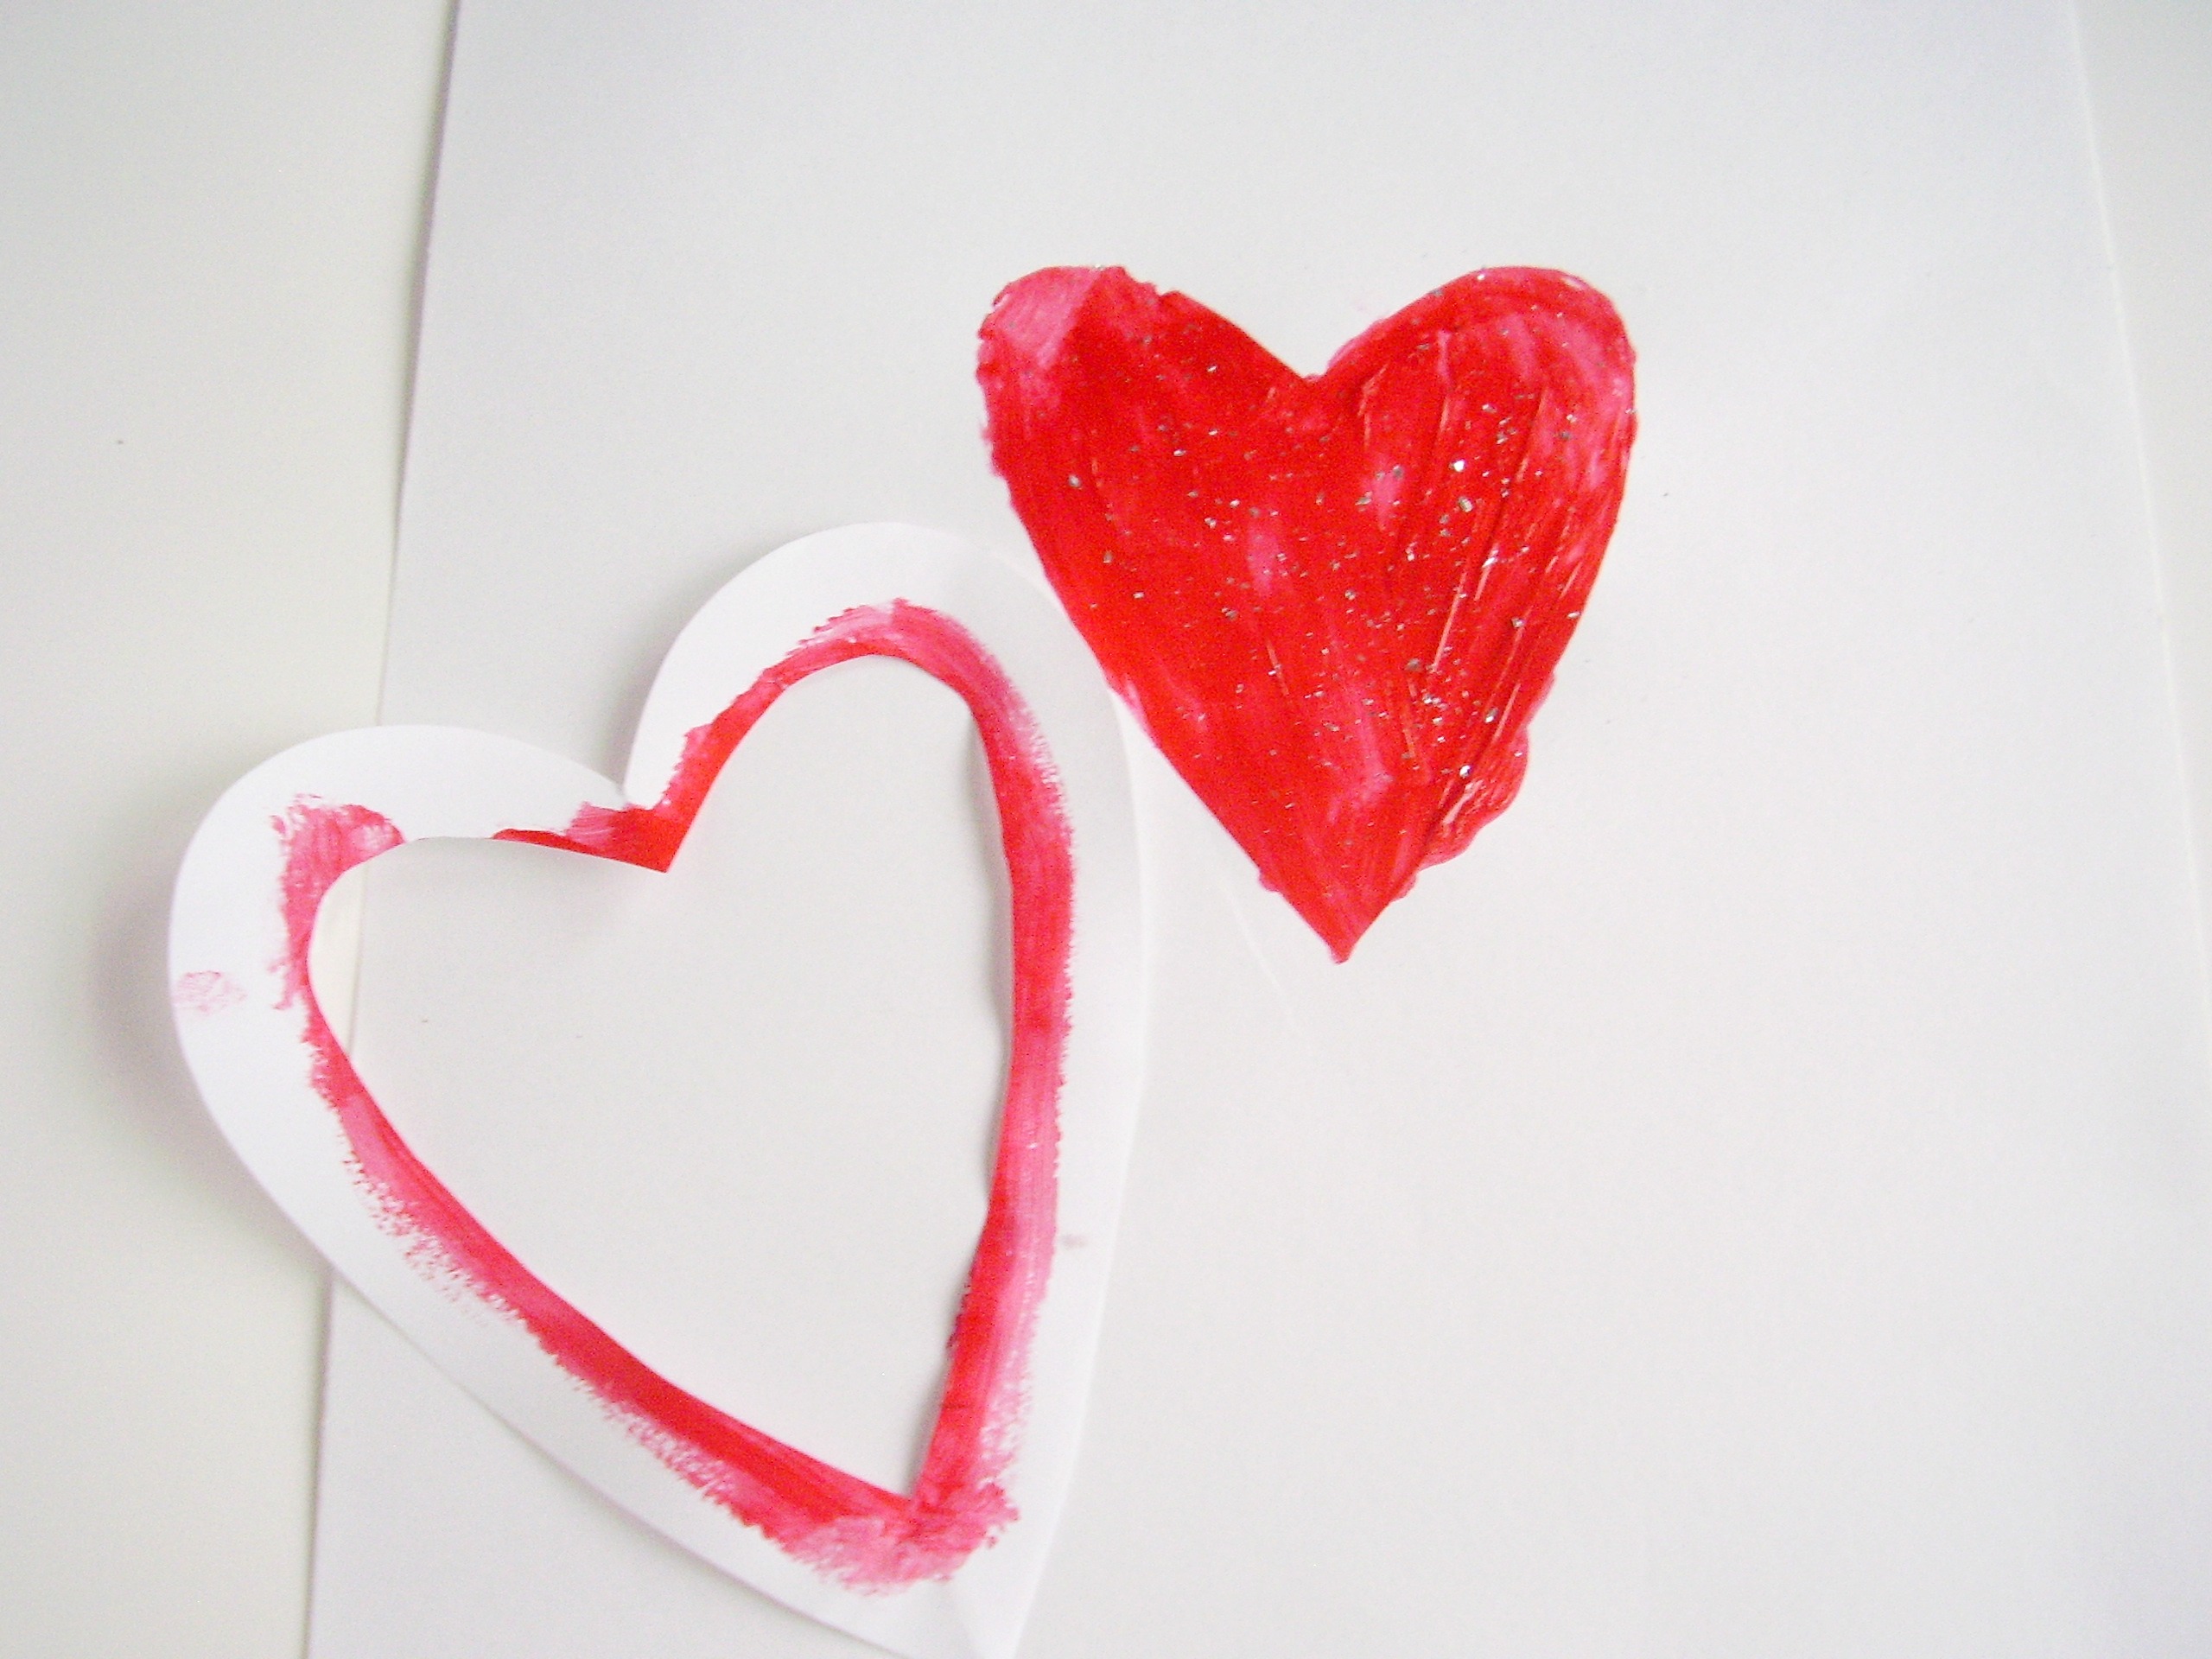 Easy Stencils Kids Can Make for Painting Valentines » Preschool Toolkit